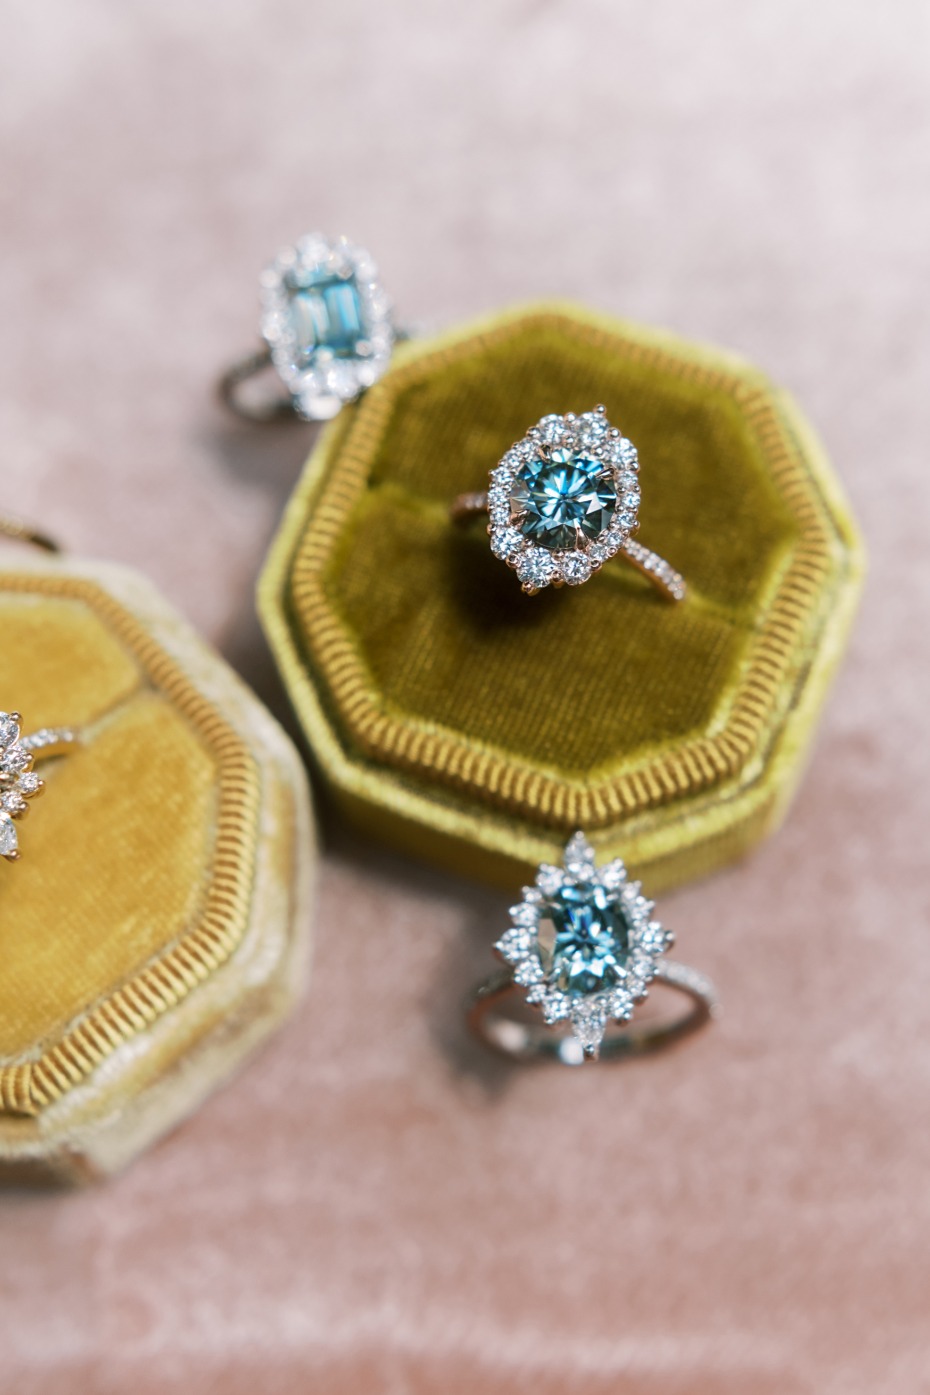 Ethically Made And Straight Up Stunning, We Can’t Help But Say Yes To These Engagement Rings By Kristin Coffin